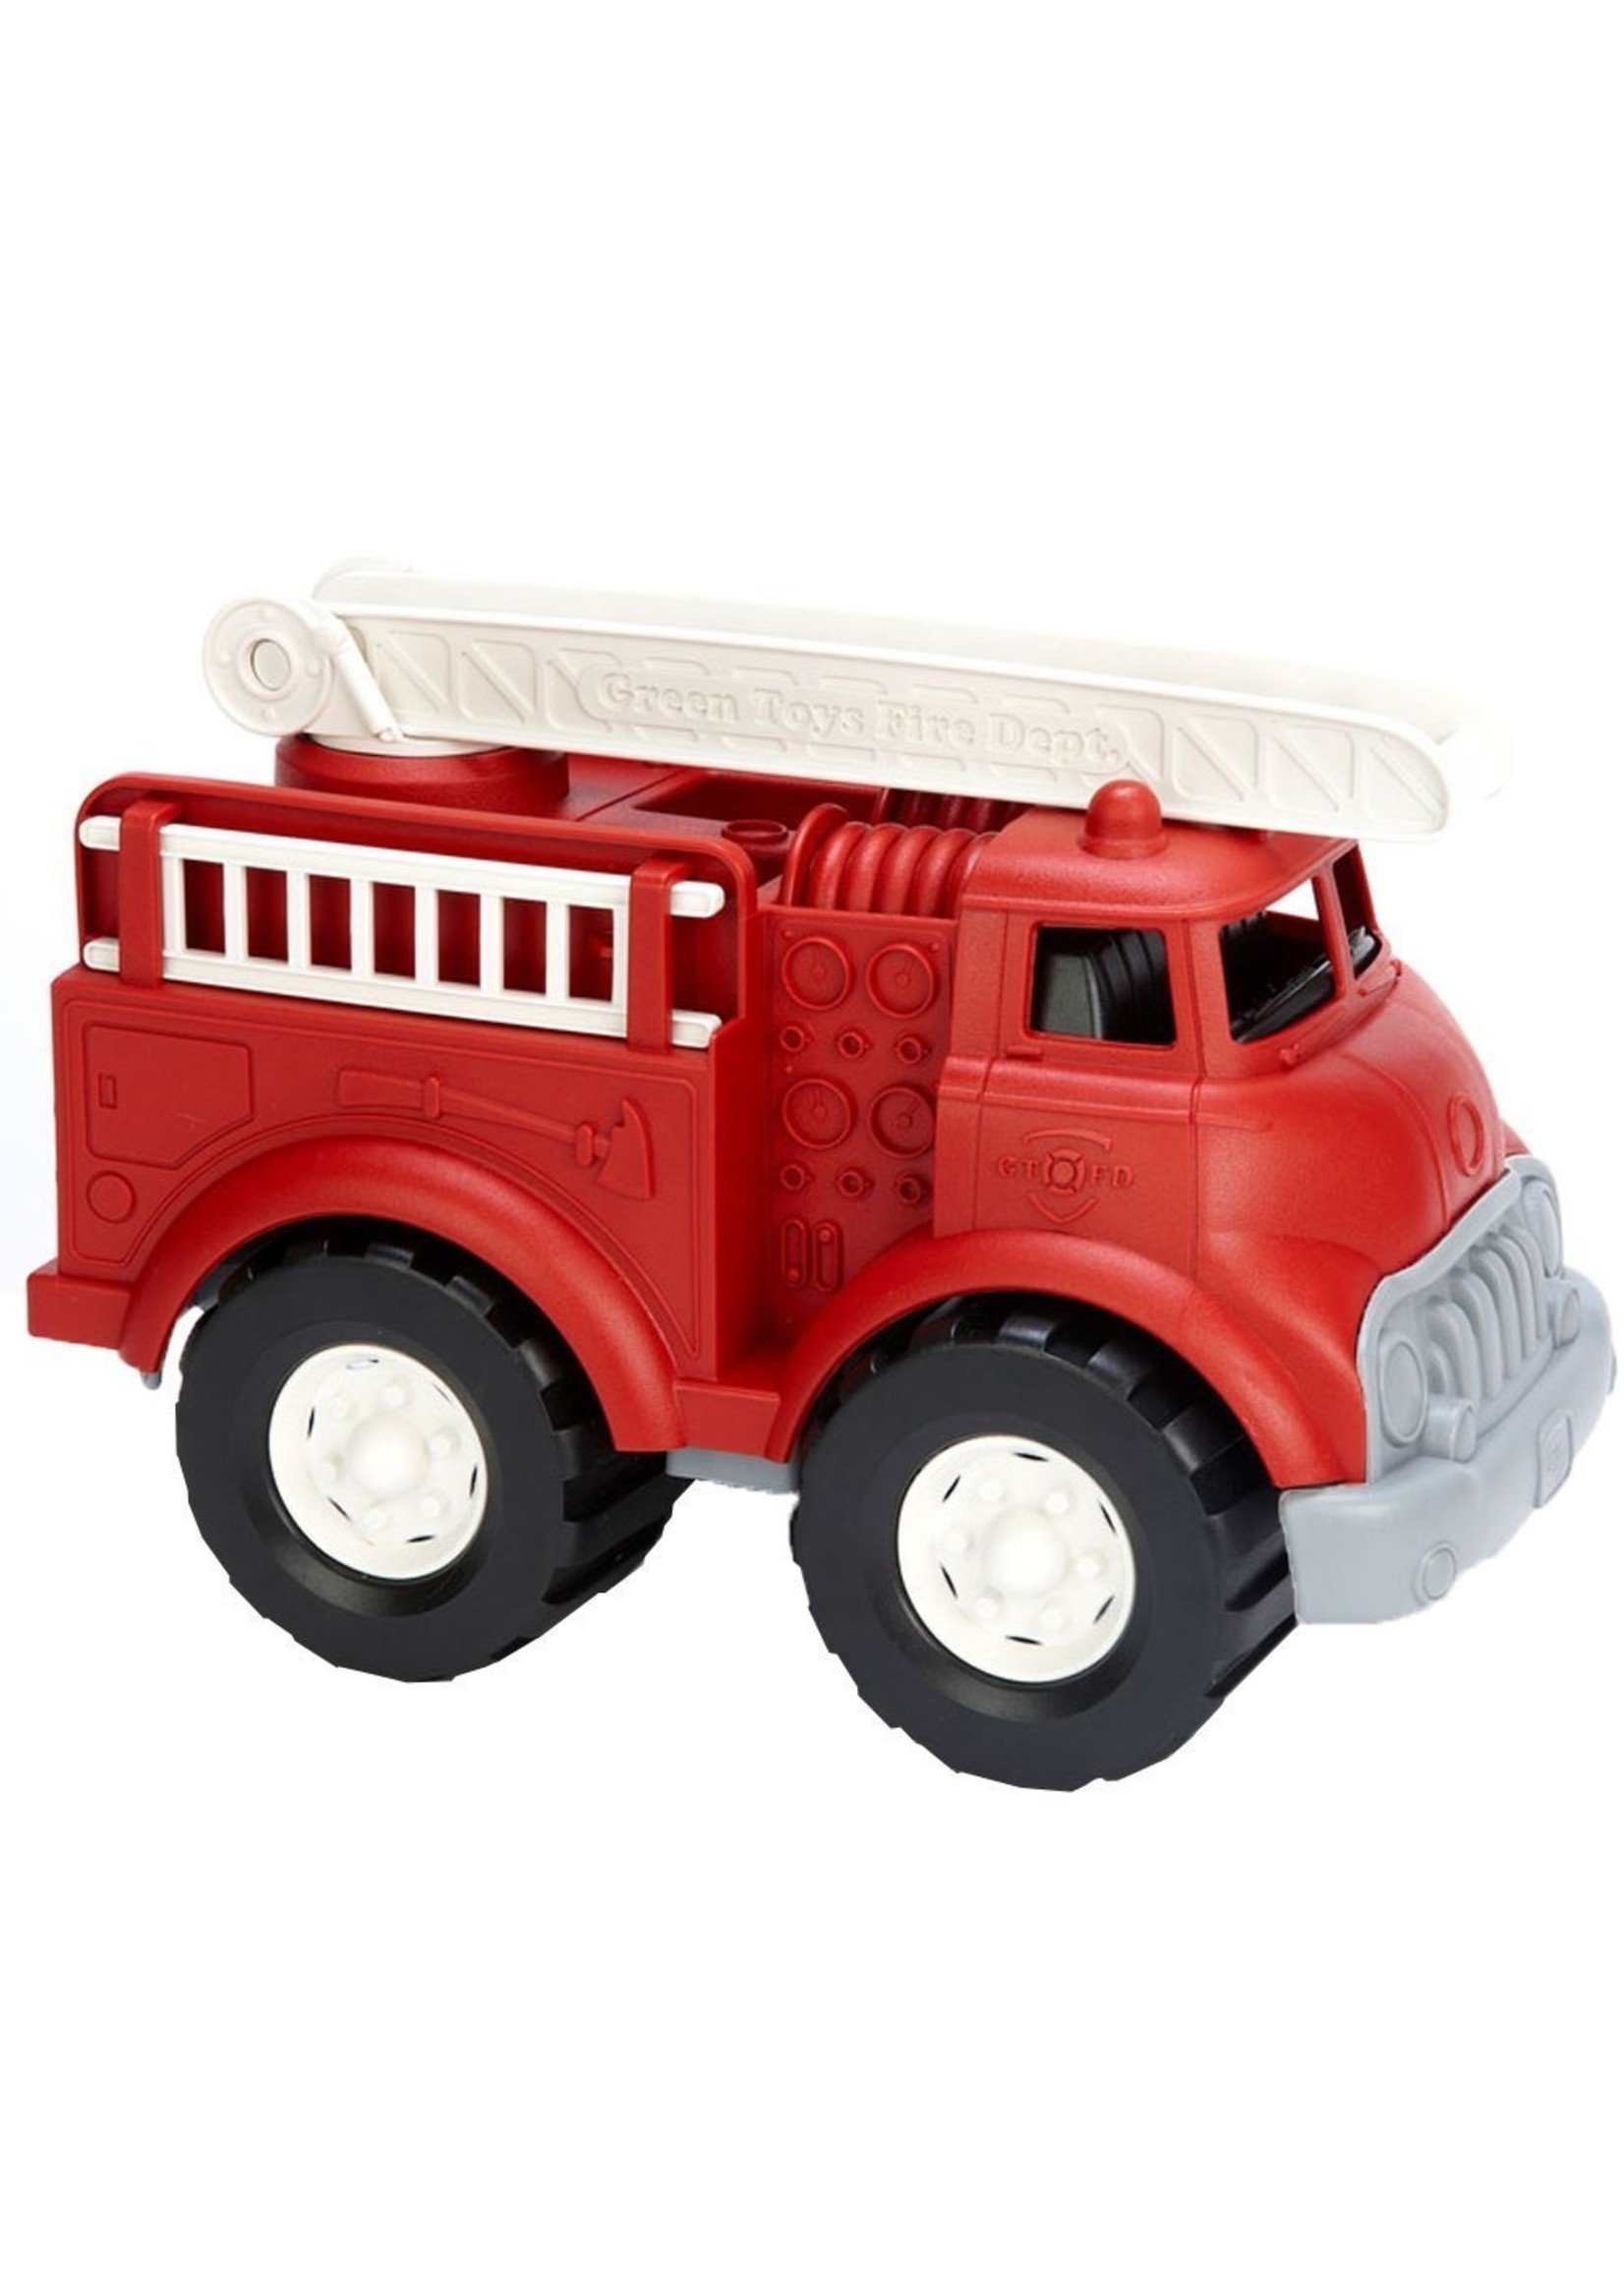 Fire Truck in Red Color - BPA Free, Phthalates Free Play Toy - Hub Hobby